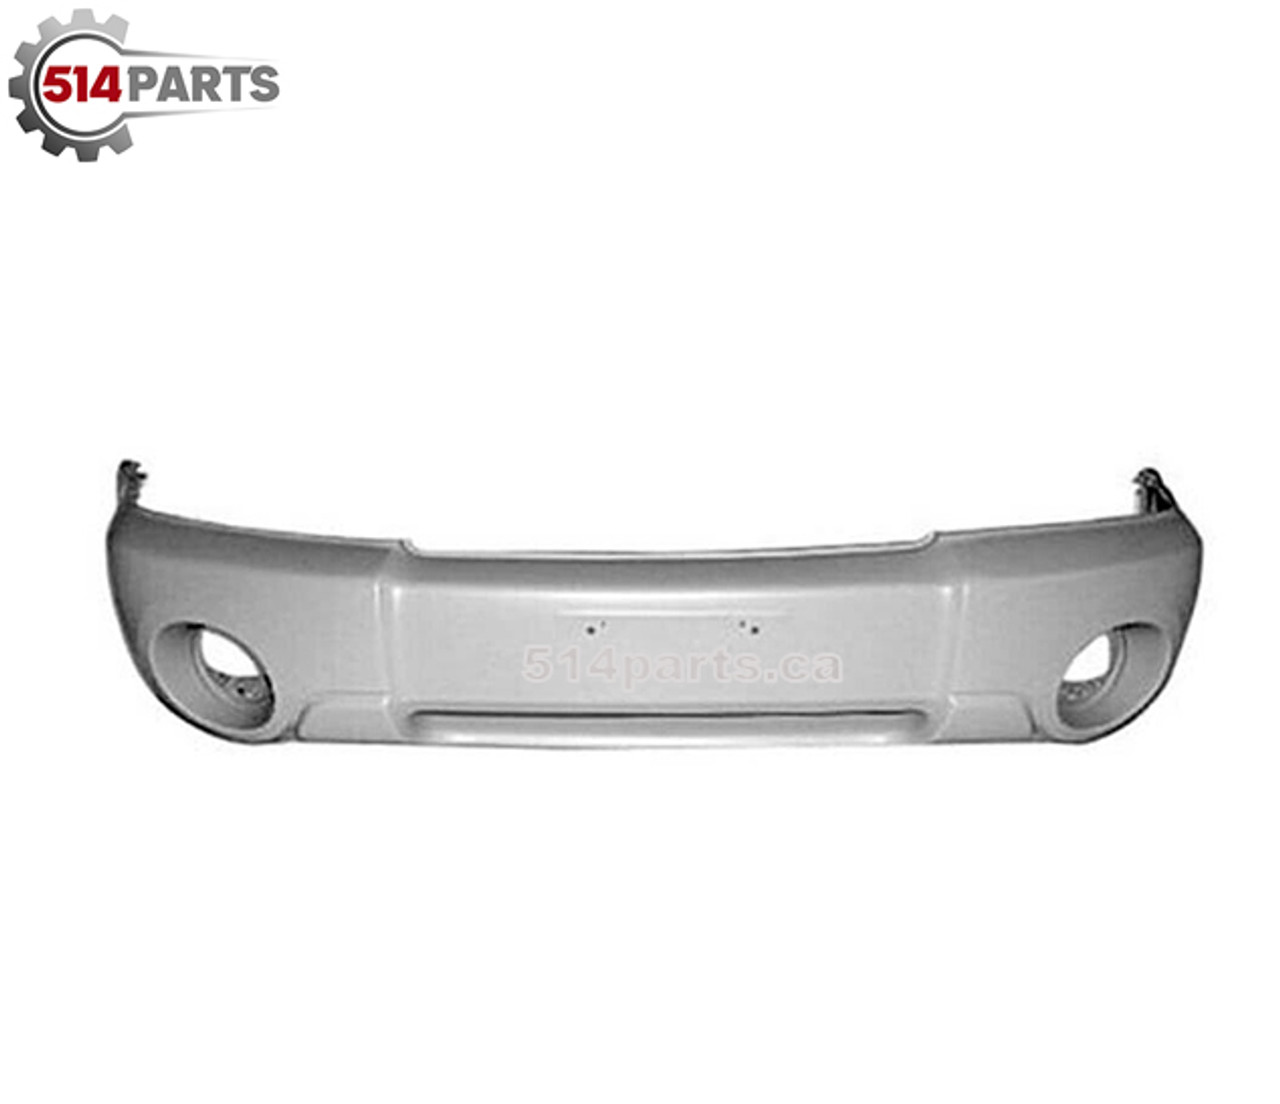 2003 - 2005 SUBARU FORESTER except 2.5X MODEL FRONT BUMPER COVER SMOOTH PRIMED FINISH - PARE-CHOCS AVANT FINITION LISSE PRIMEE